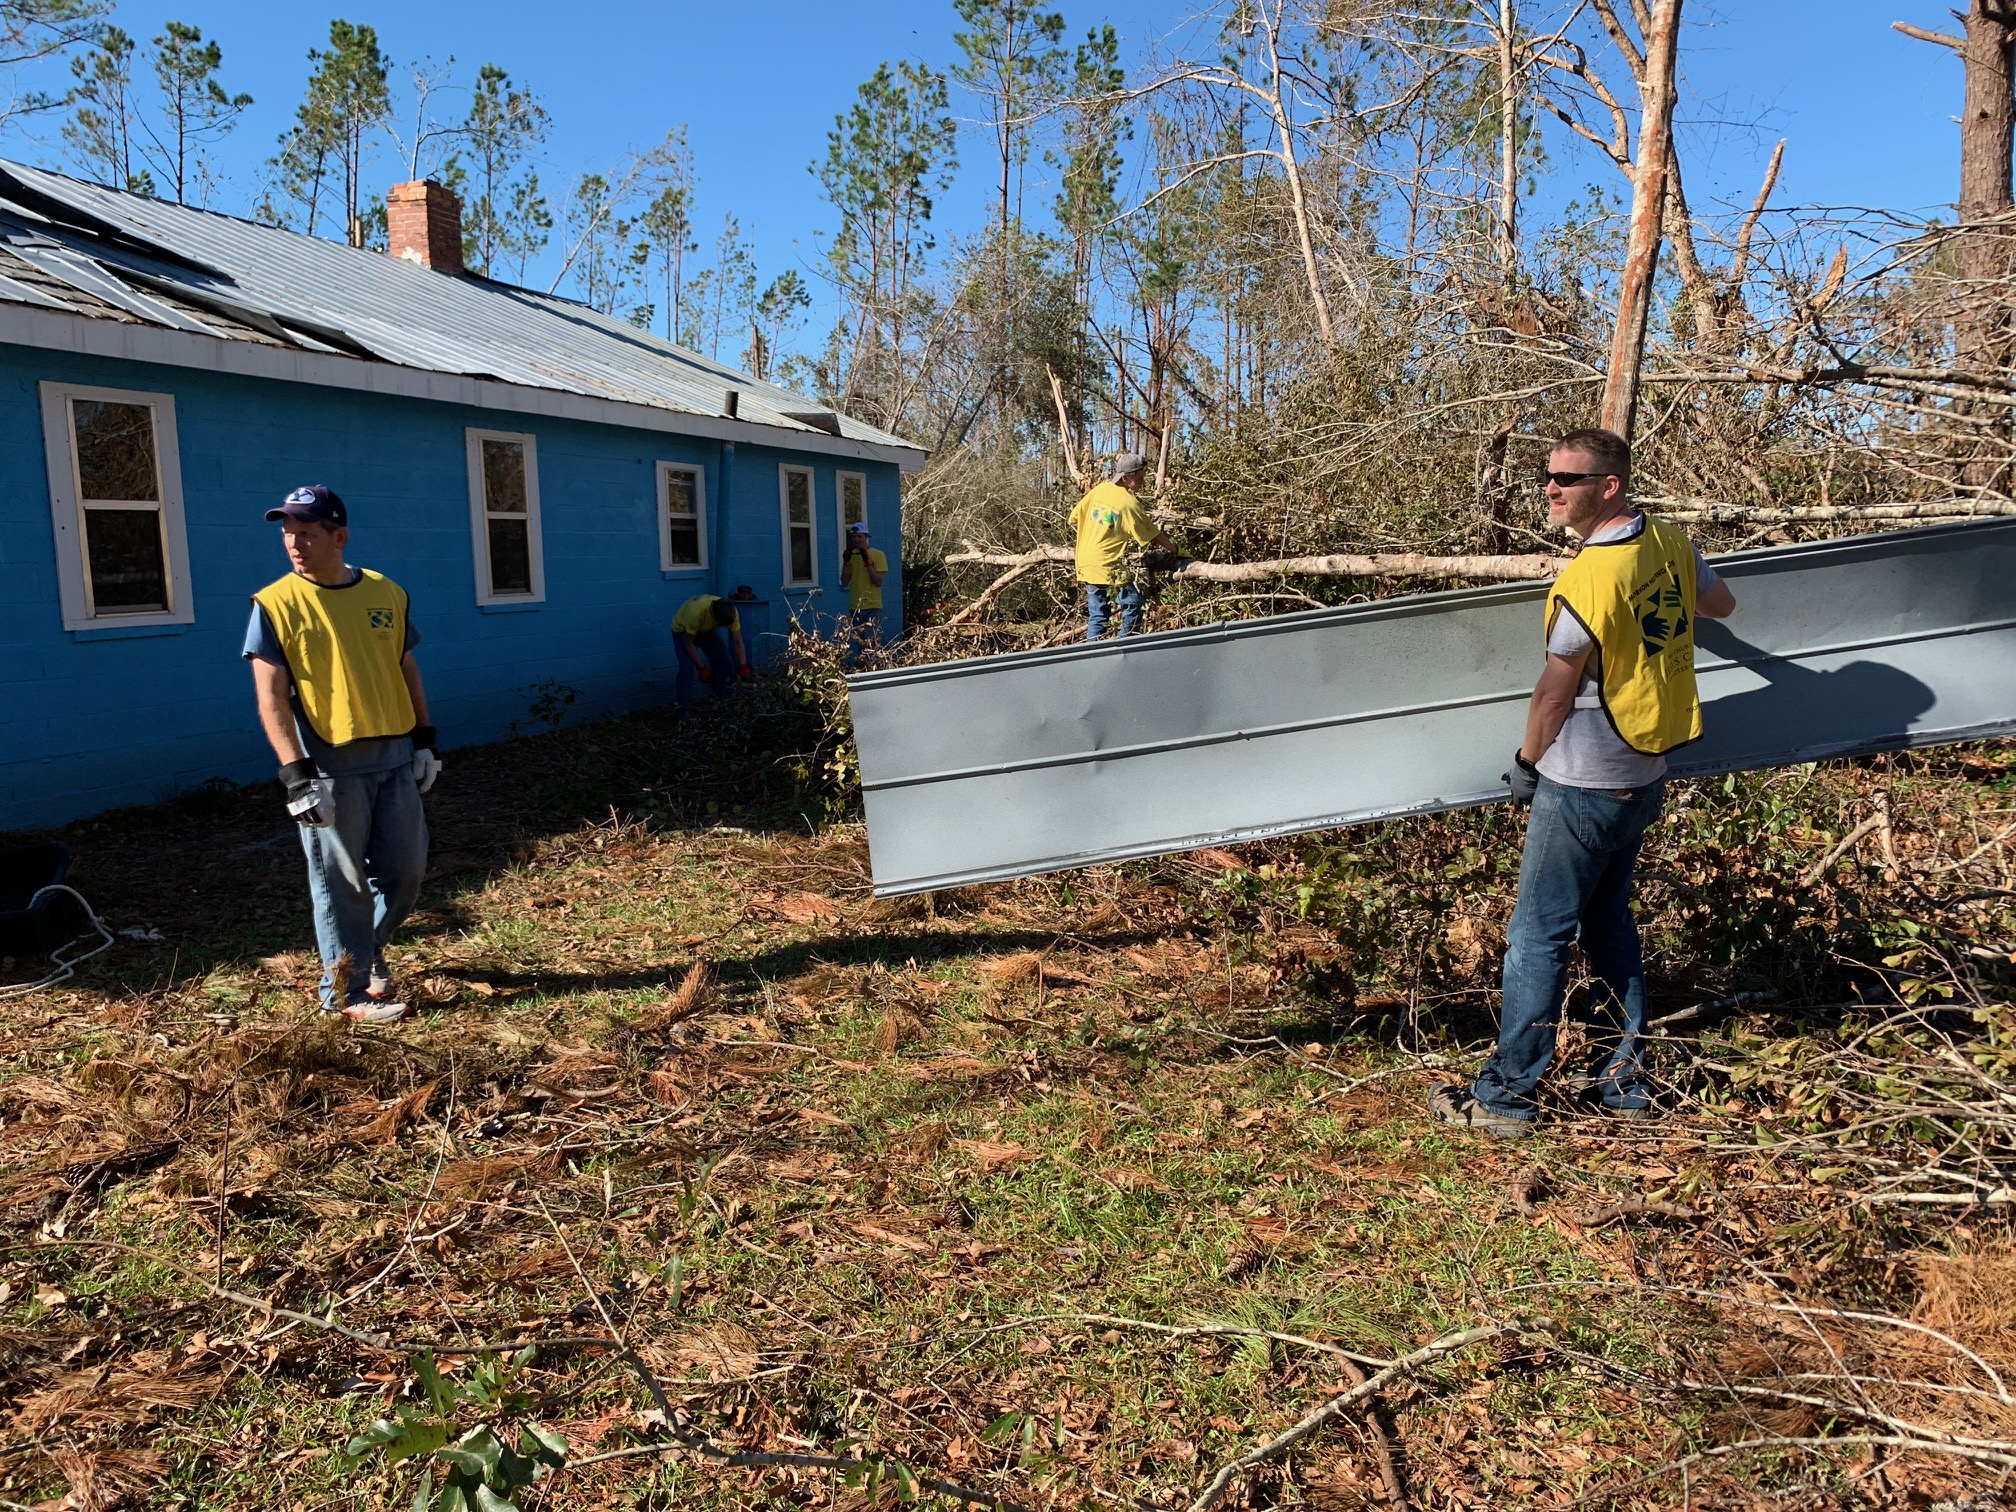 Massive Volunteer Effort for Hurricane Michael Cleanup Organized by LDS Church in Coral Springs